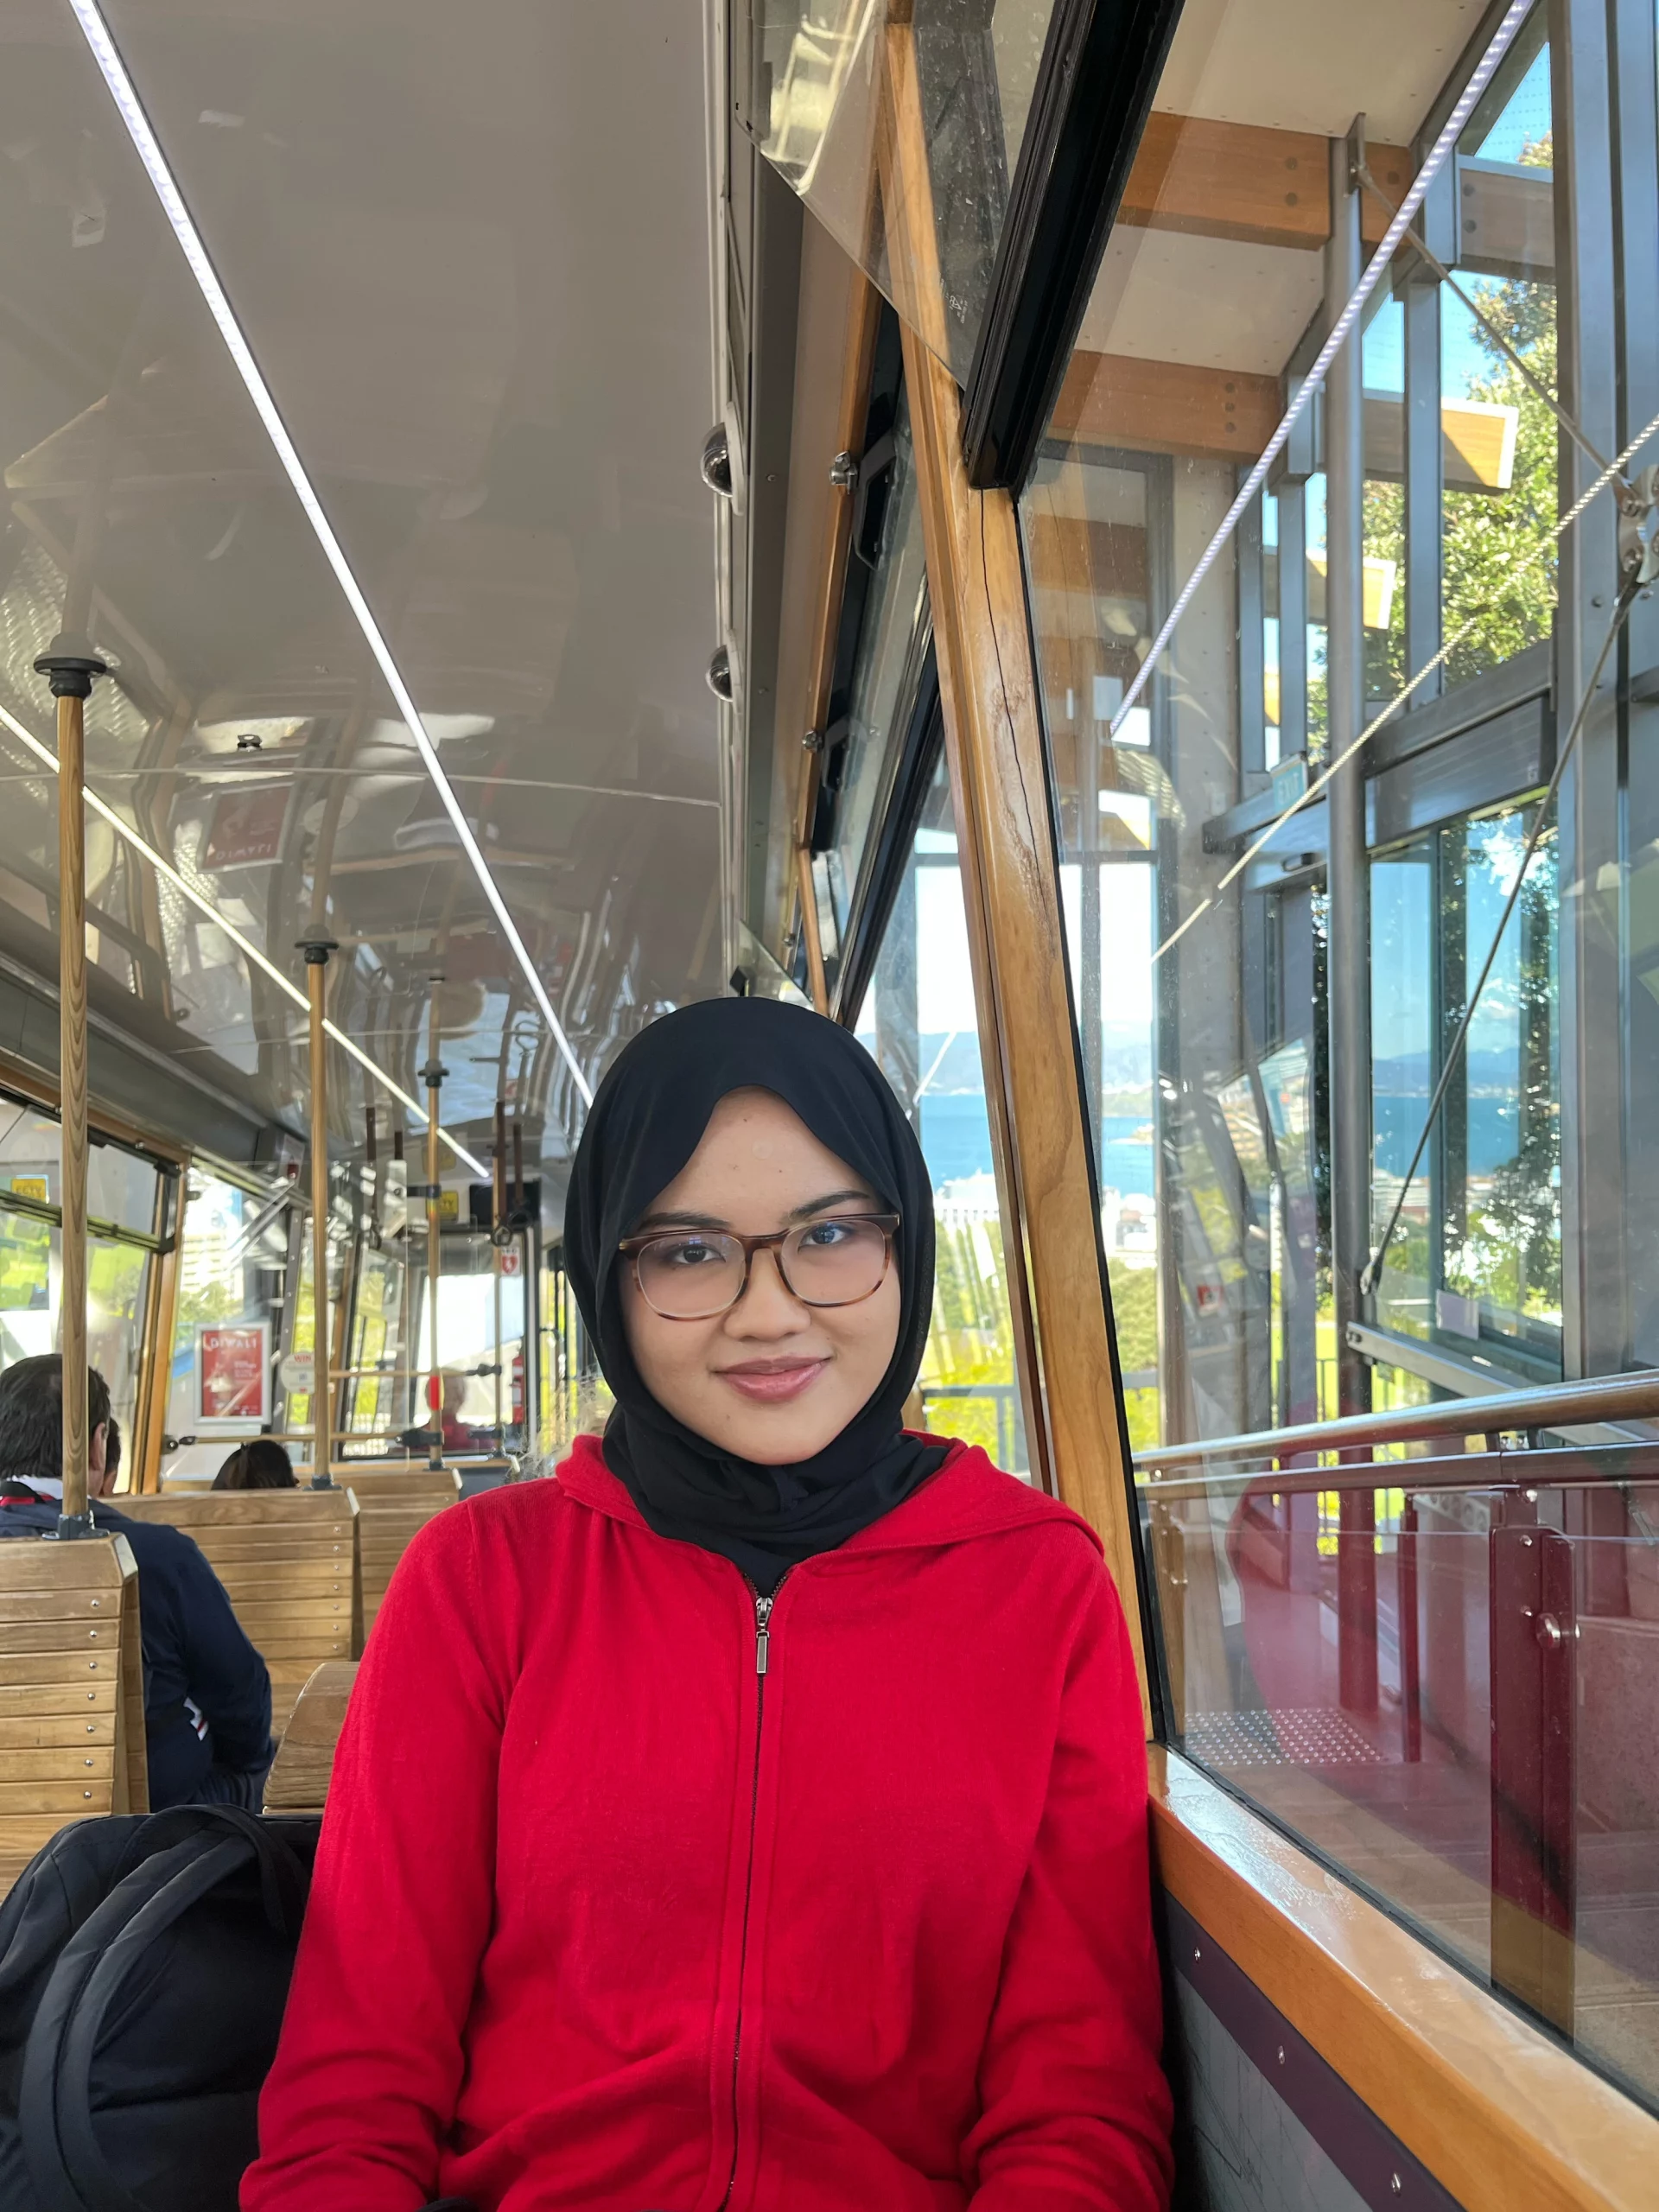 Joining IISMA, Nadja learns wellbeing culture in New Zealand